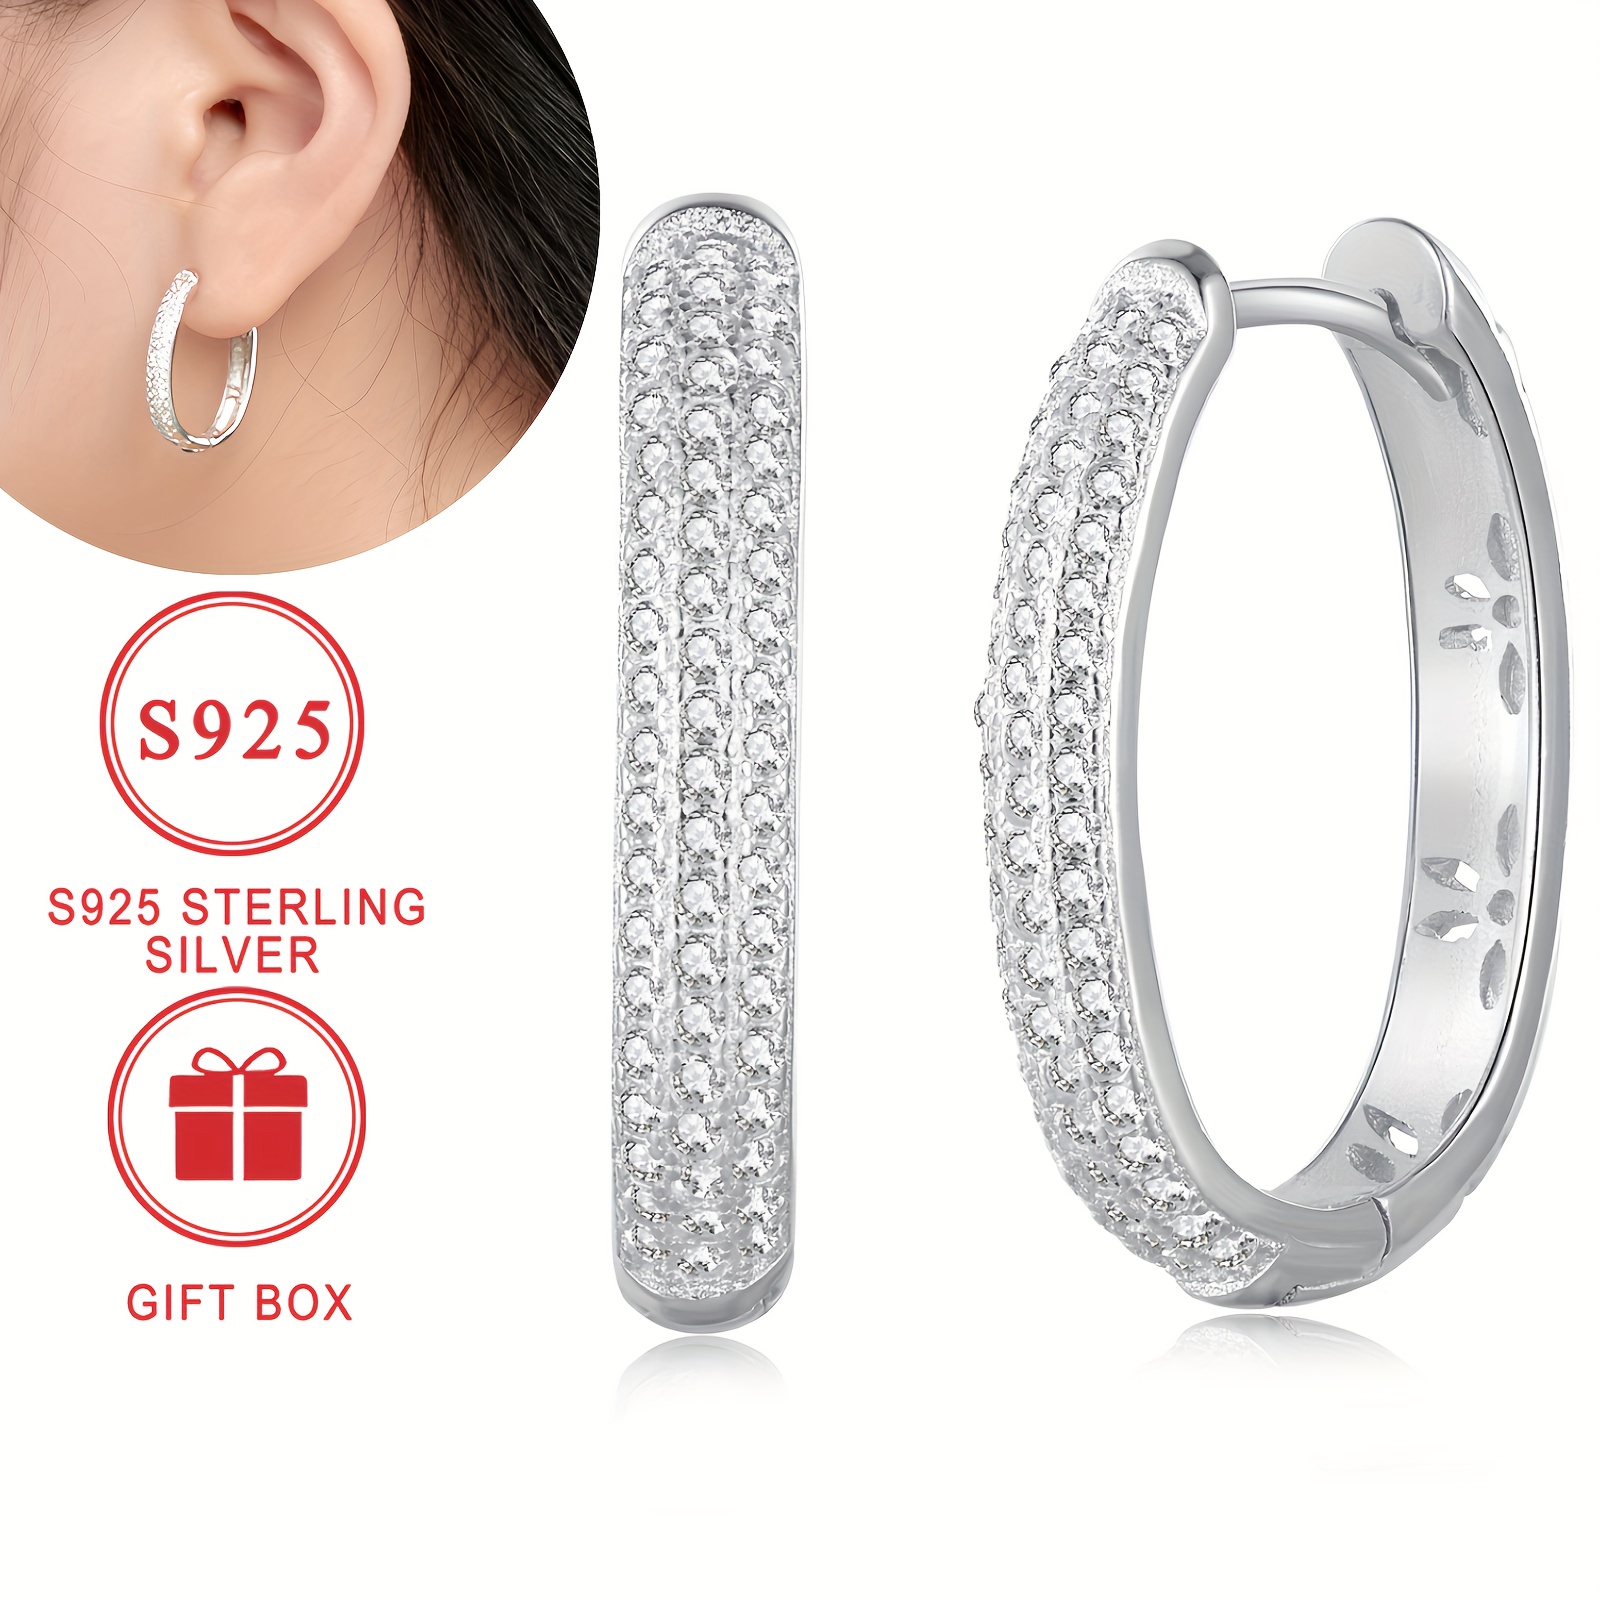 

Elegant S925 Sterling Silver Hoop Earrings For Women, Fashion Circular Ear Jewelry With Half Pave Set Cubic Zirconia, High-quality Trendy Bling Ear Cuffs, Comes With Gift Box, Perfect For Gifting